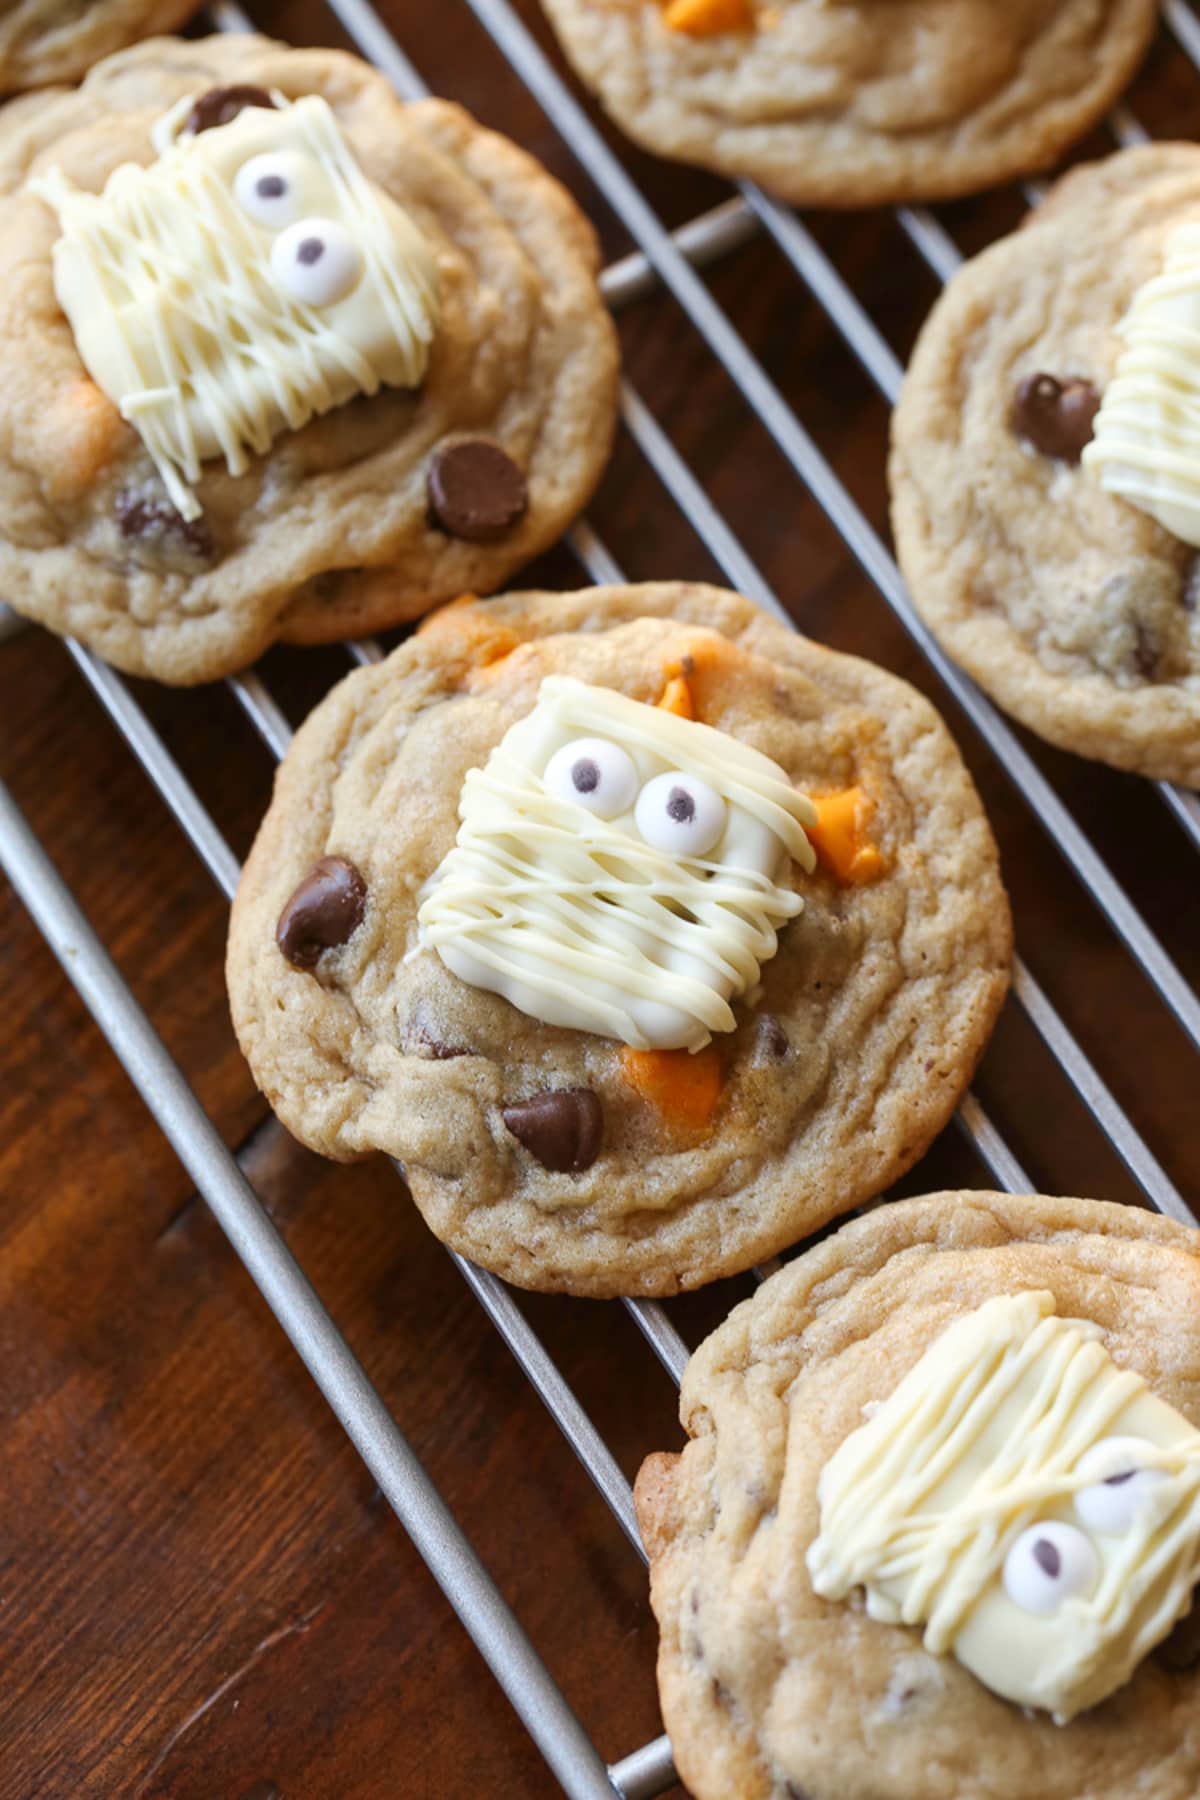 Chocolate chip cookies on a wire cooling rack with orange chips topped with a white chocolate pretzel decorated like a mummy.